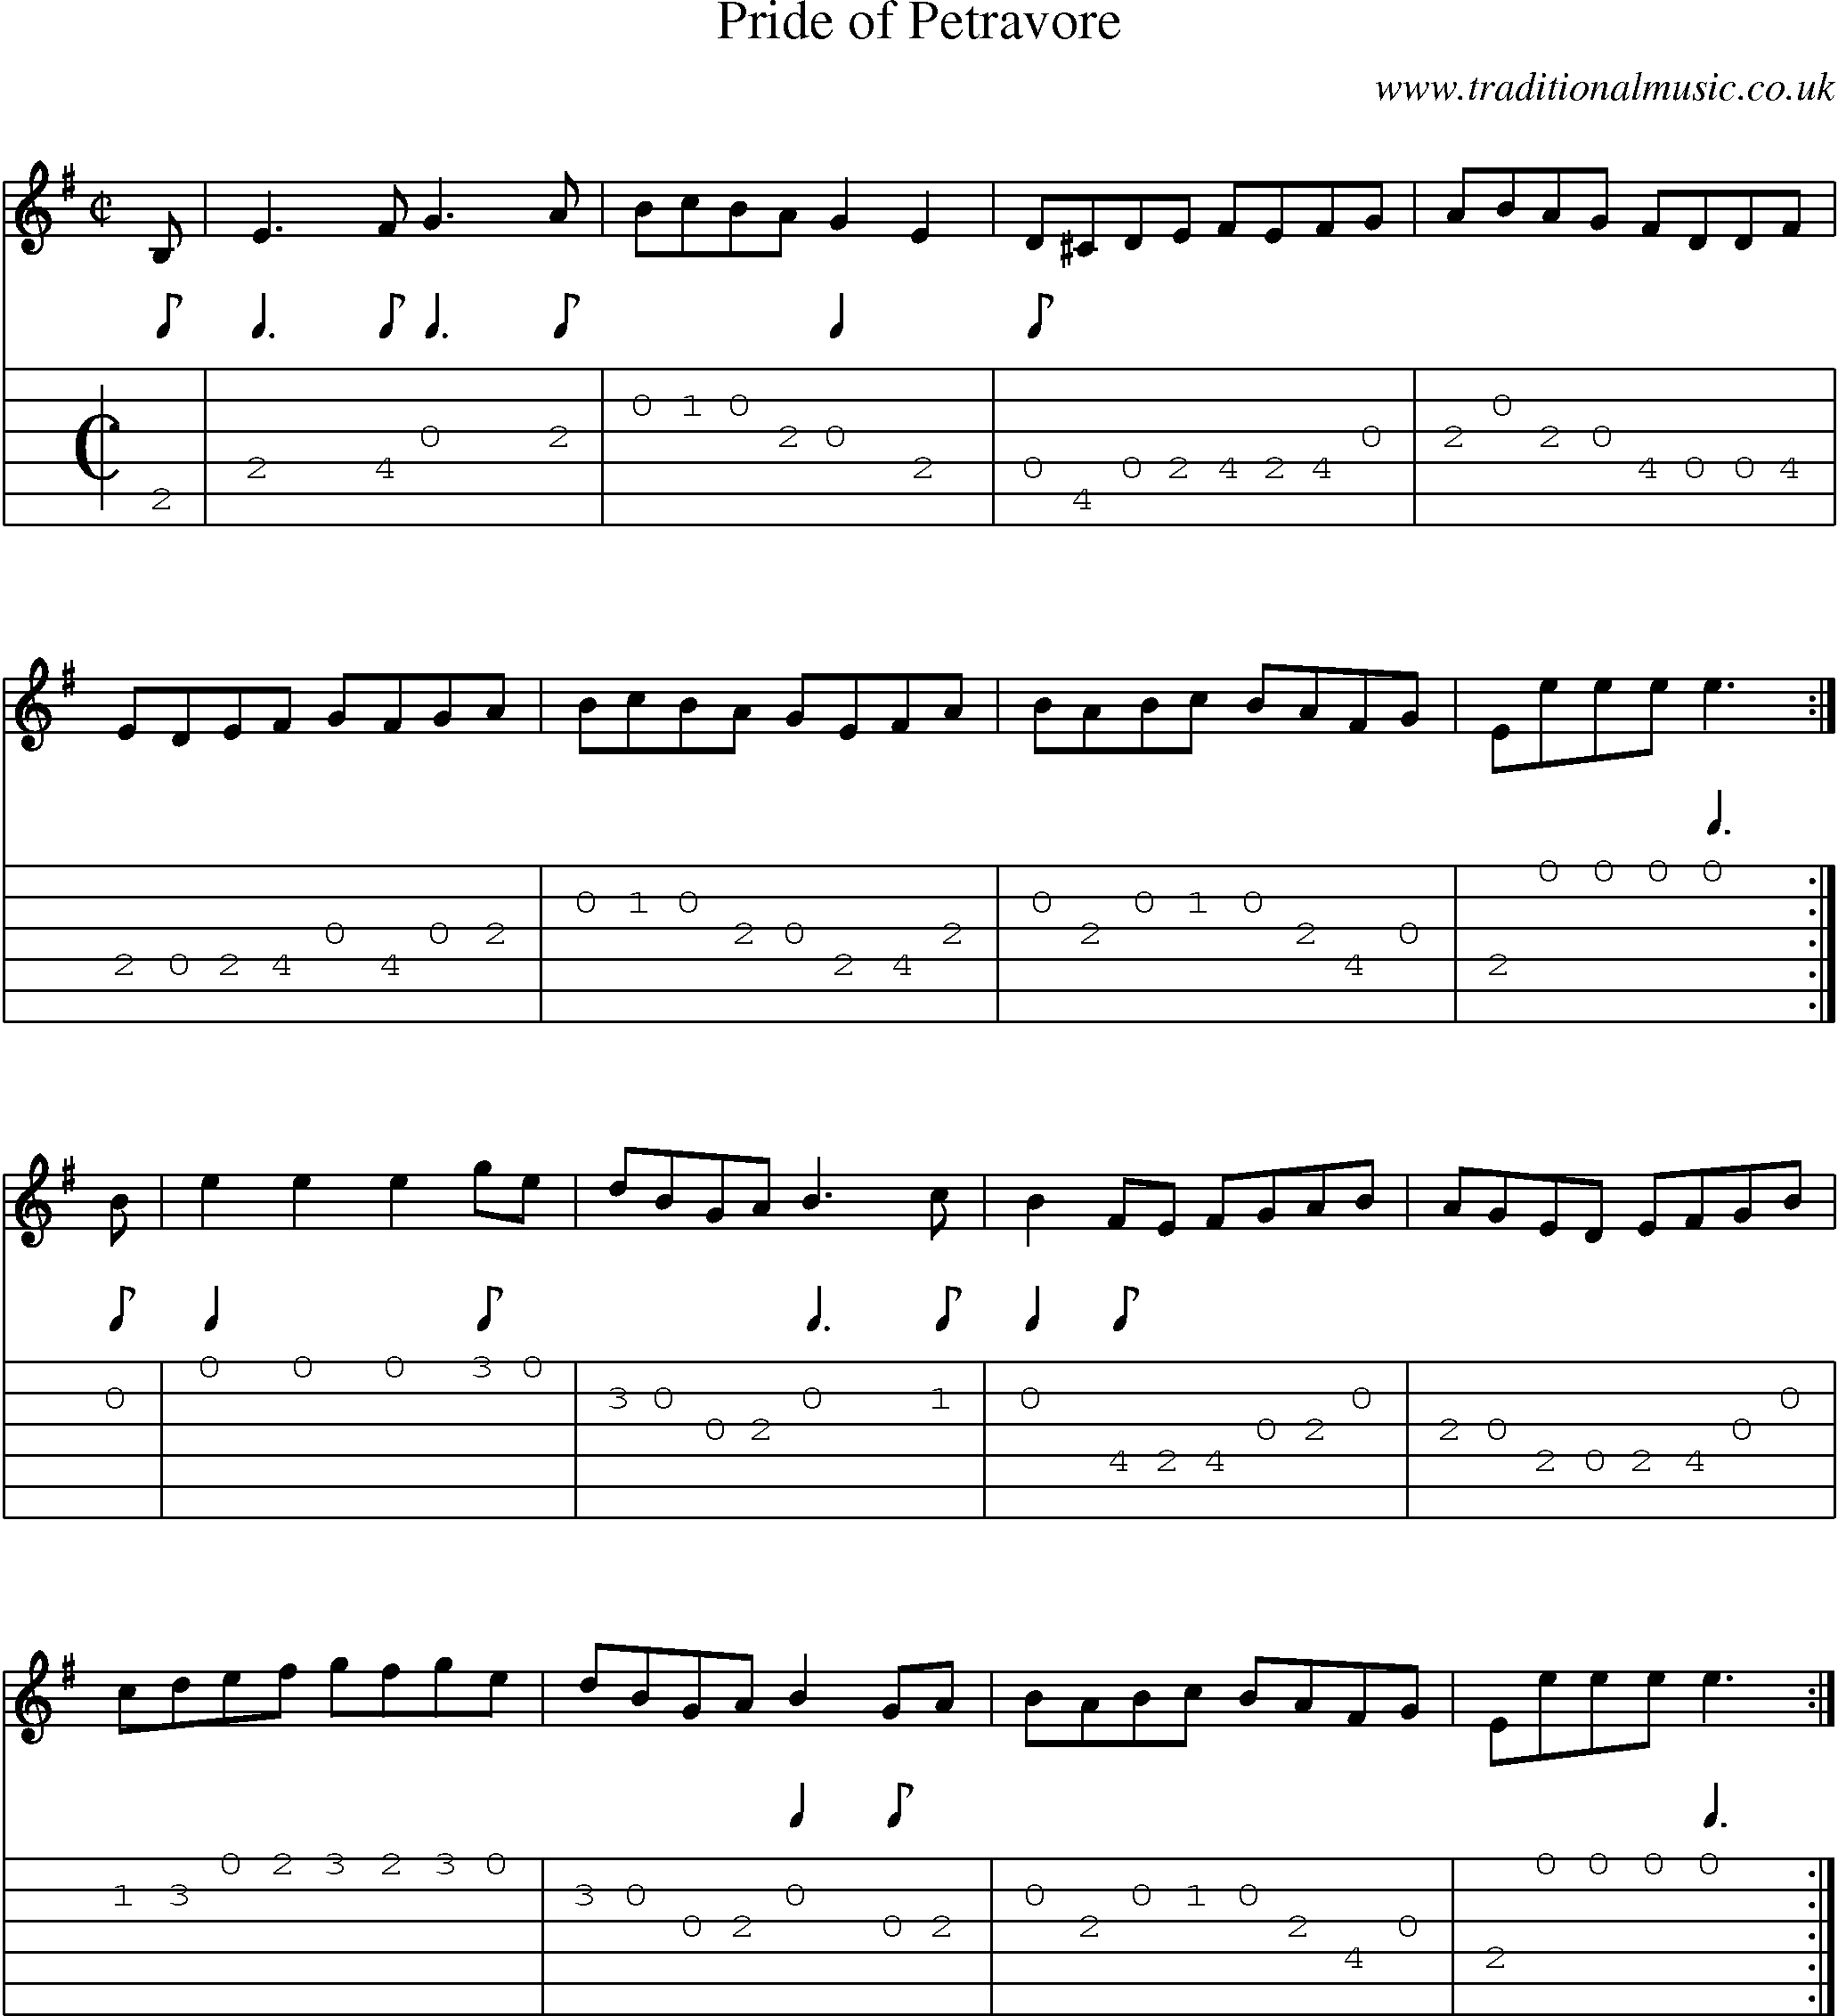 Music Score and Guitar Tabs for Pride Of Petravore